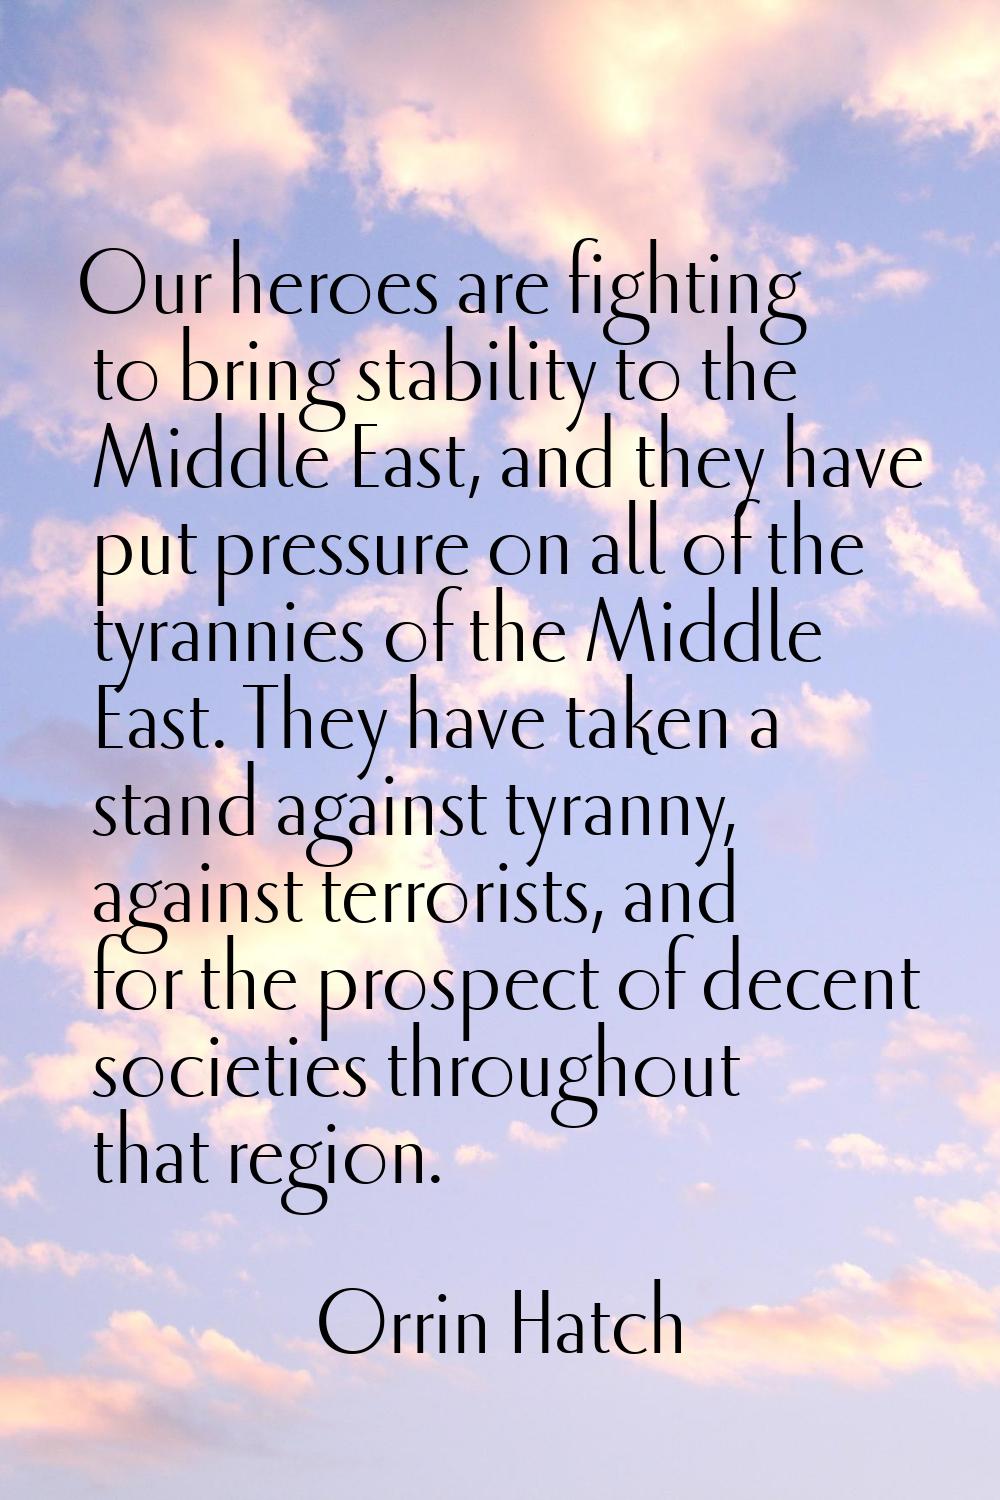 Our heroes are fighting to bring stability to the Middle East, and they have put pressure on all of